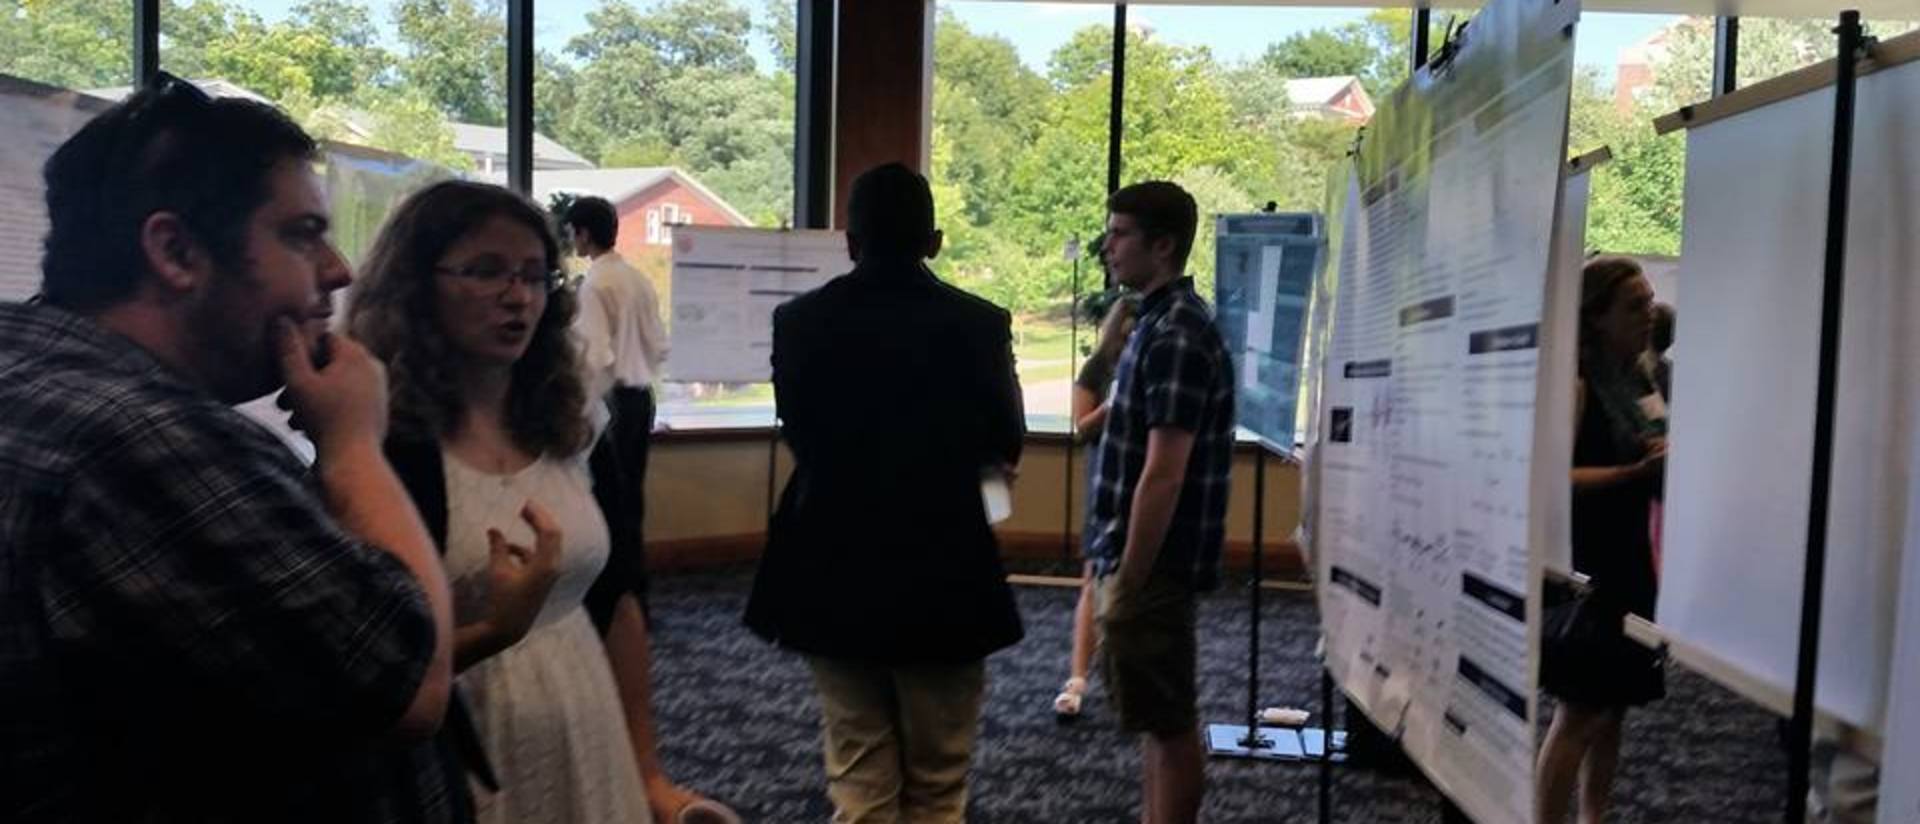 Students presenting research at a conference